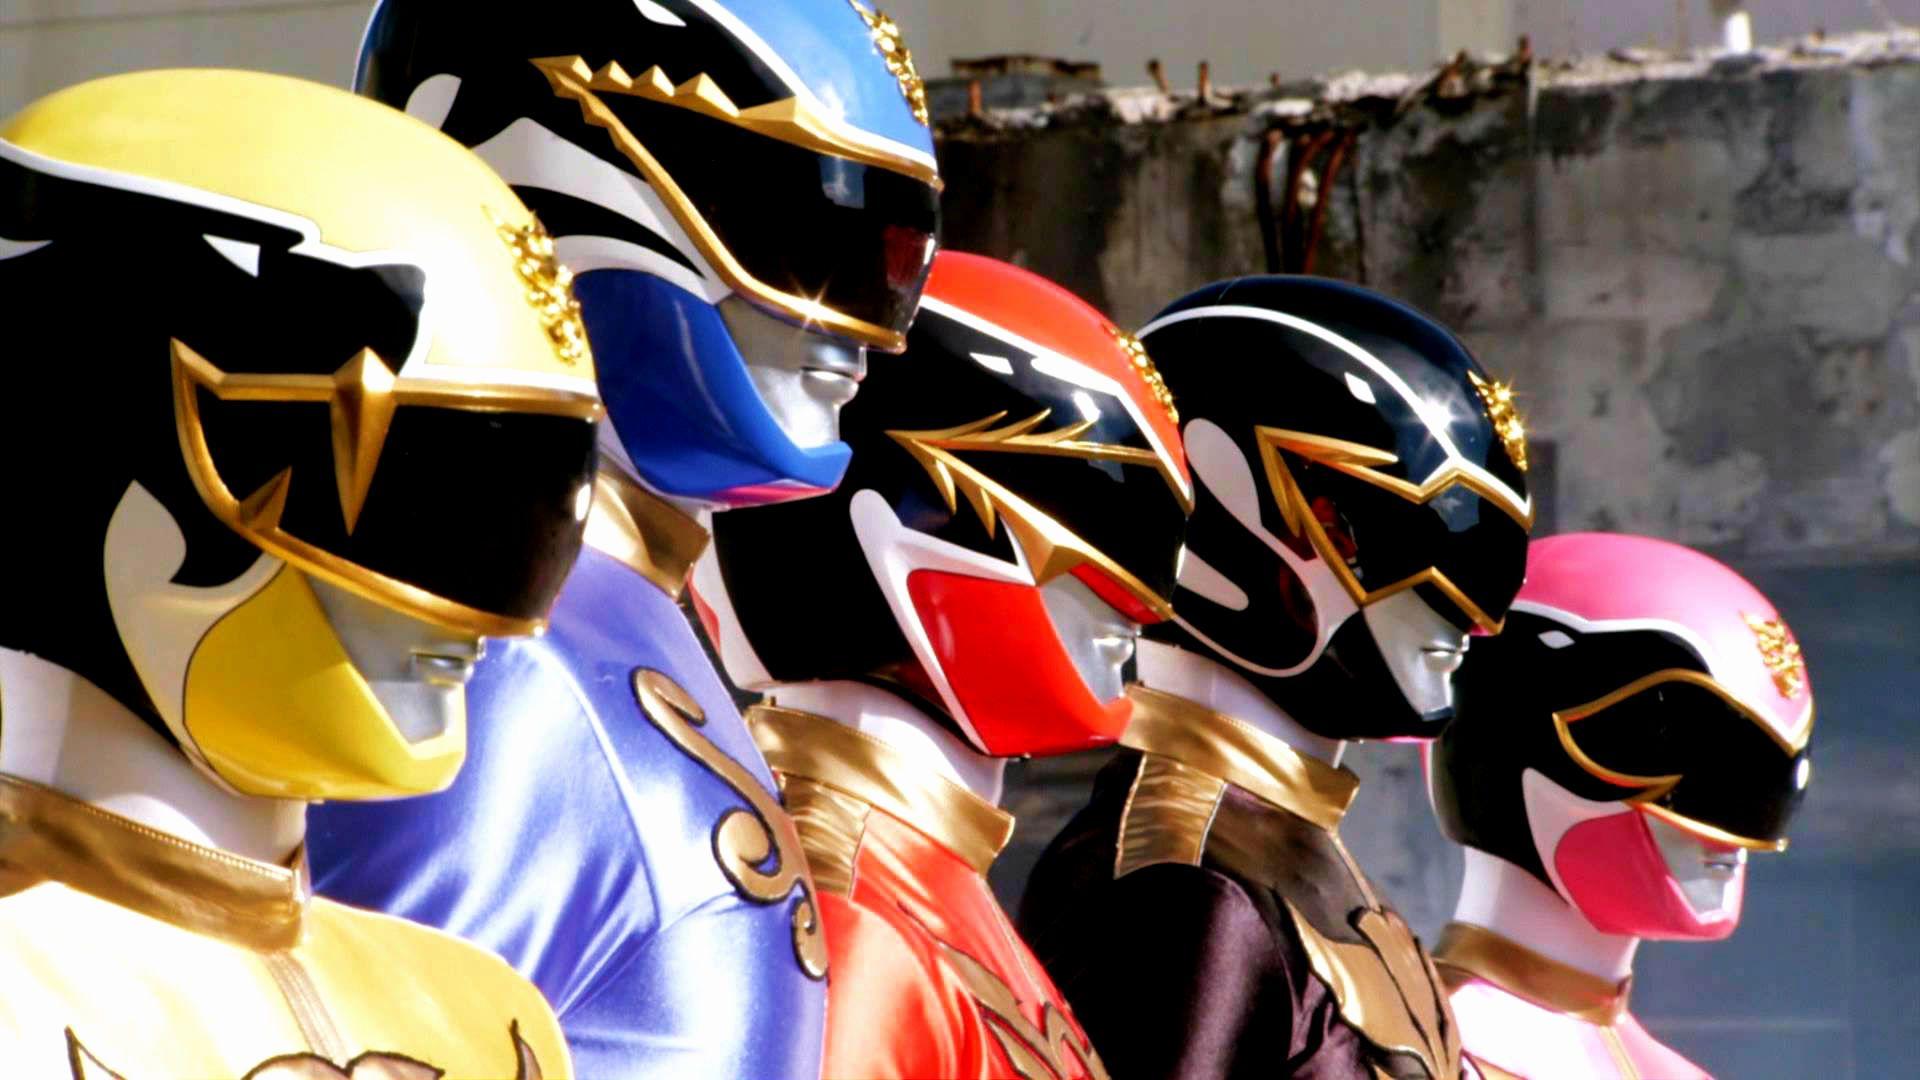 Power Rangers Image Collection: Power Rangers Wallpaper